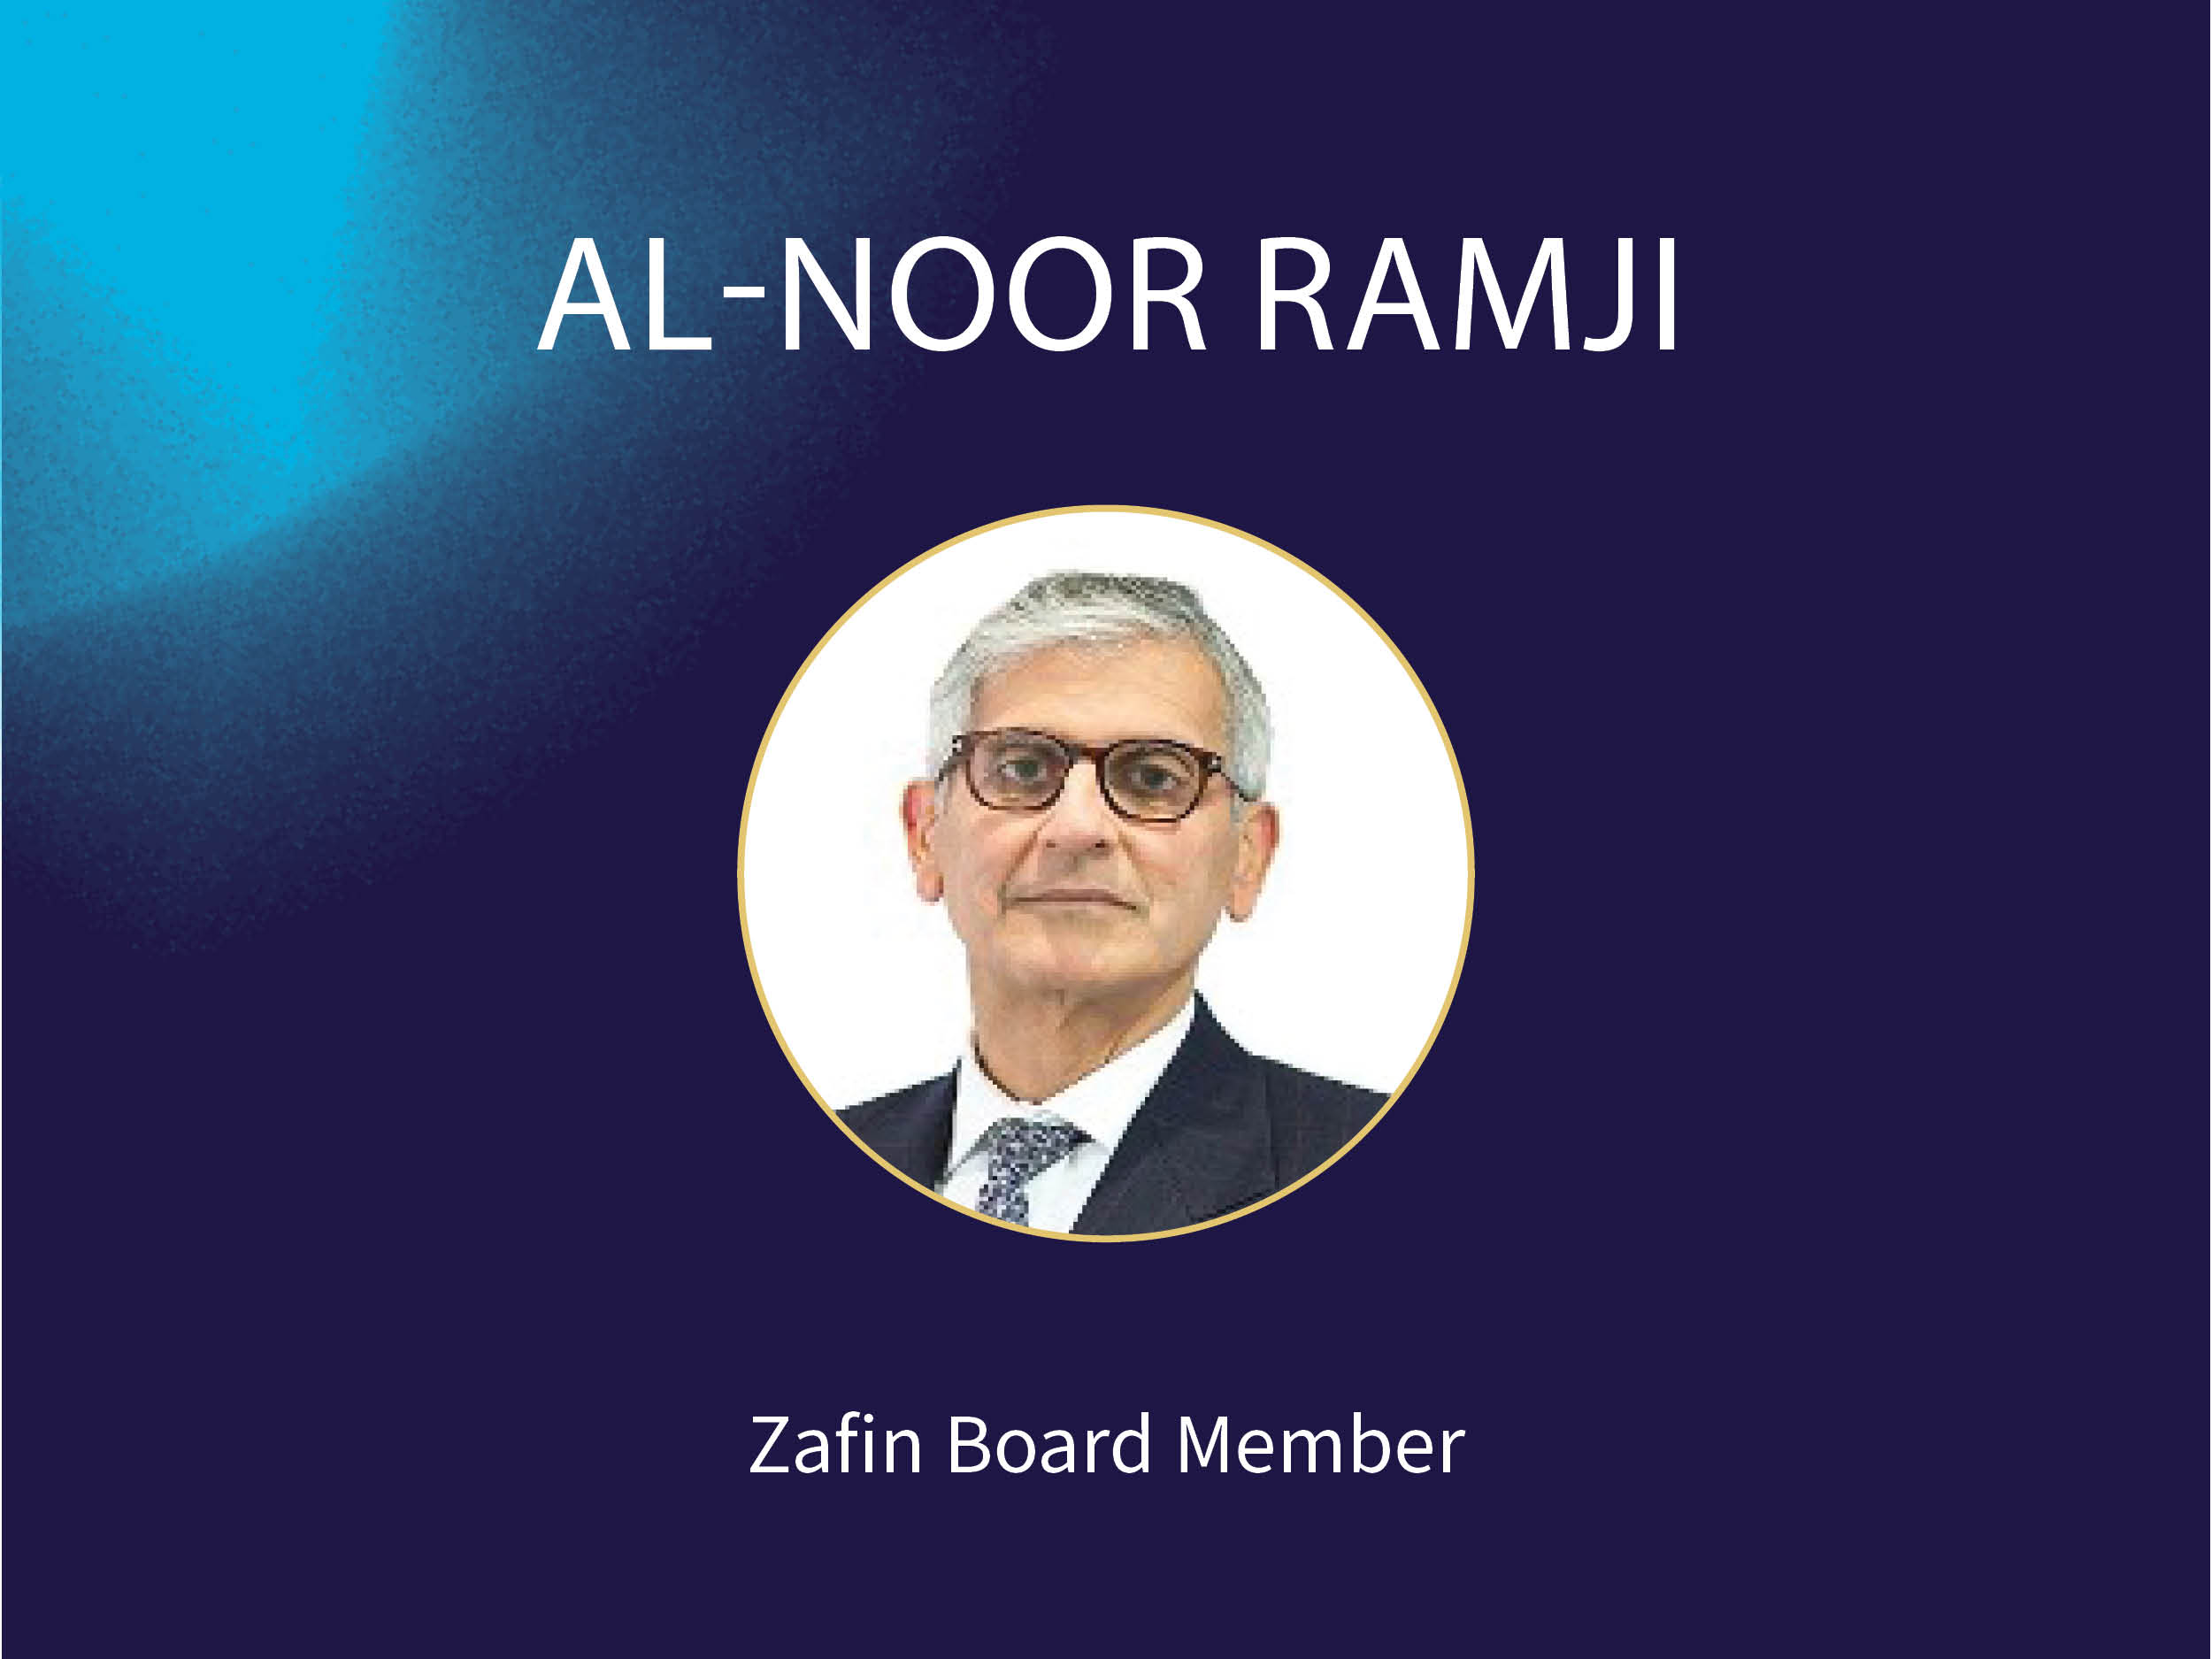 A circular portrait photo of Al-Noor Ramji to announce his incorporation as a new board of directors member.